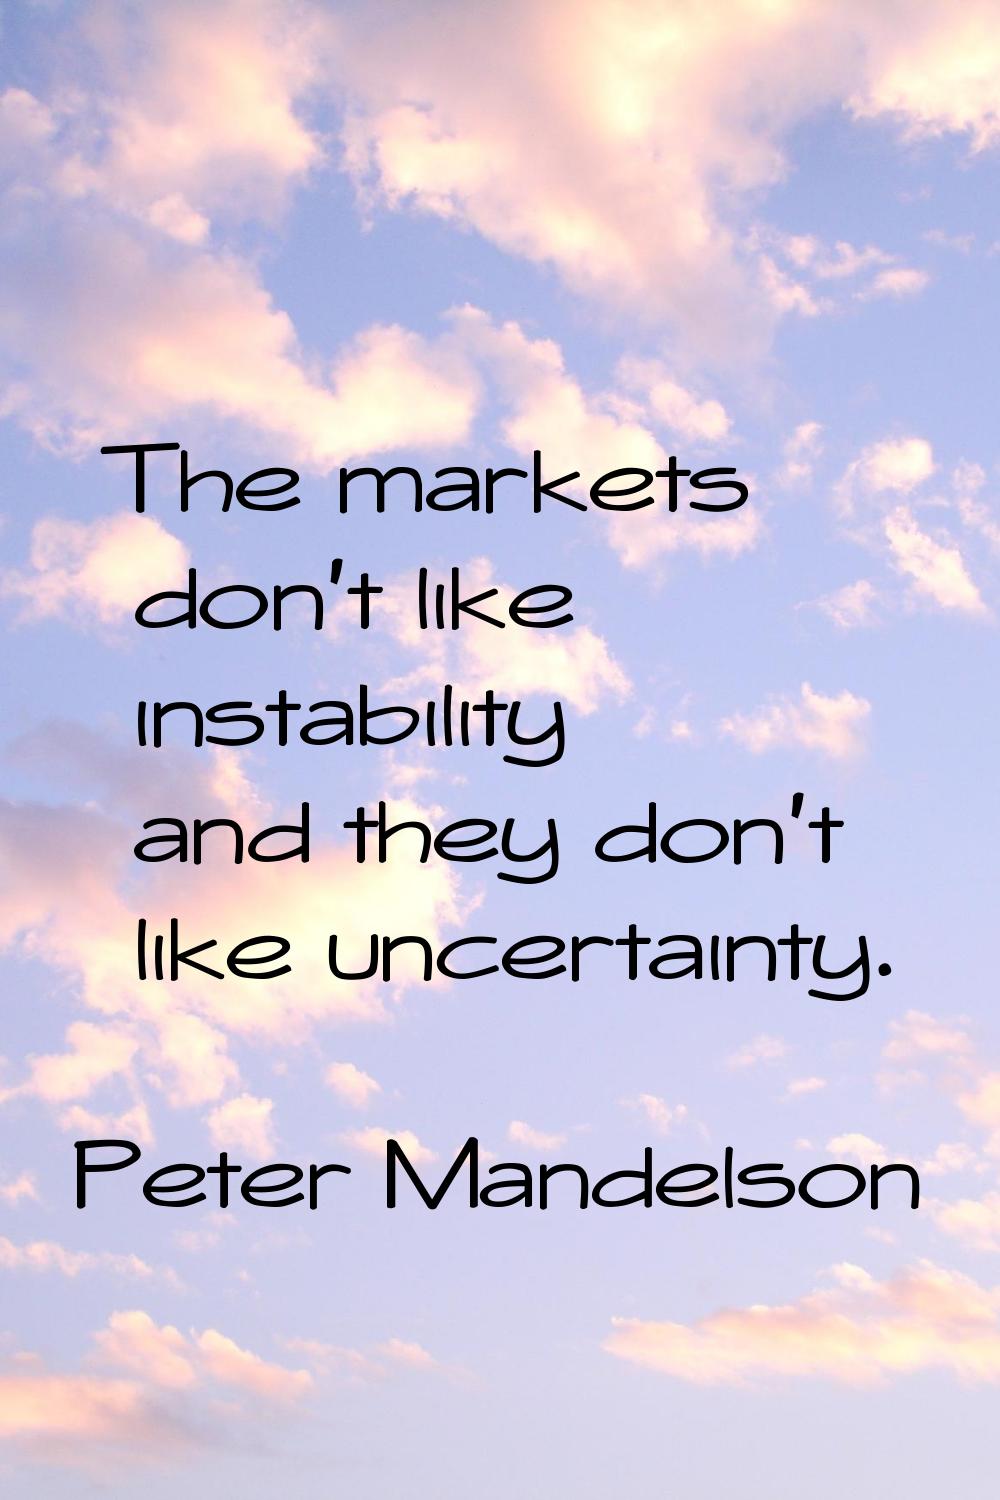 The markets don't like instability and they don't like uncertainty.